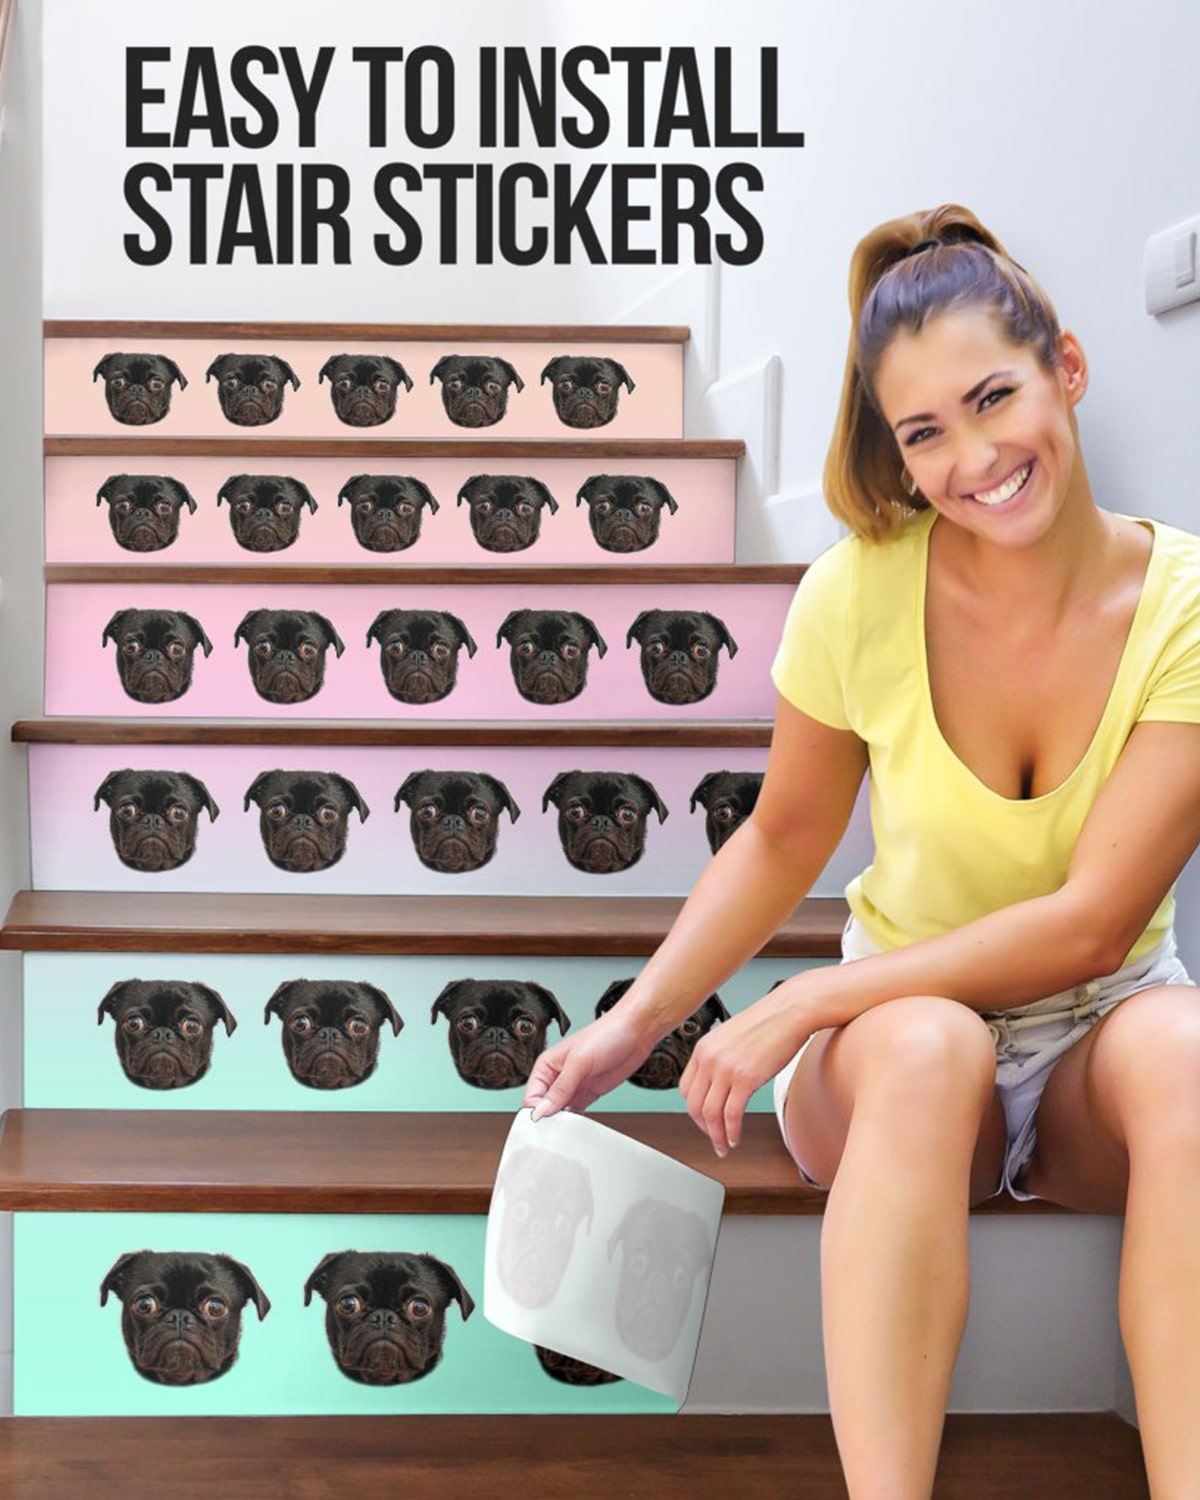 Personalized Many Face Stair Stickers - 6 pcs - ASDF Print